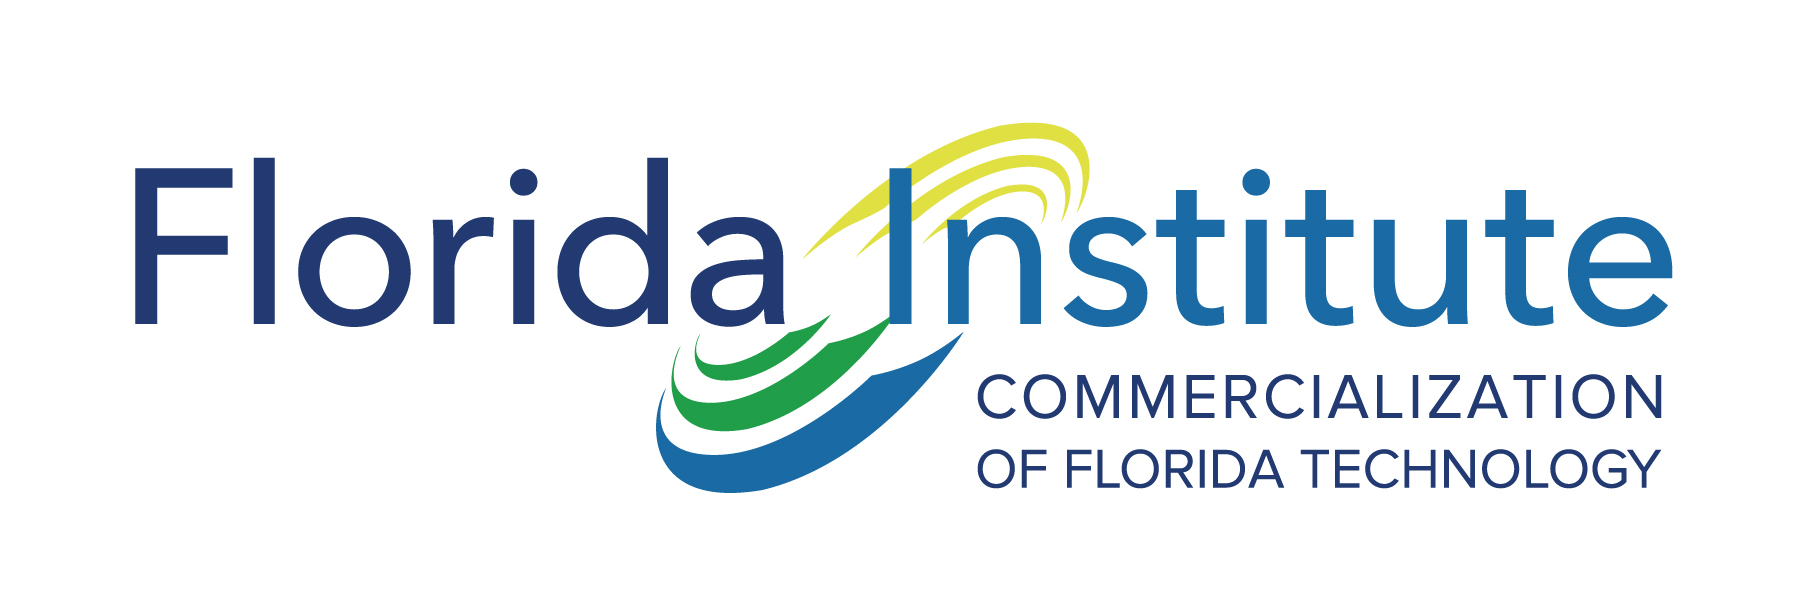 FloridaInstitute Commercialization of Florida Technology